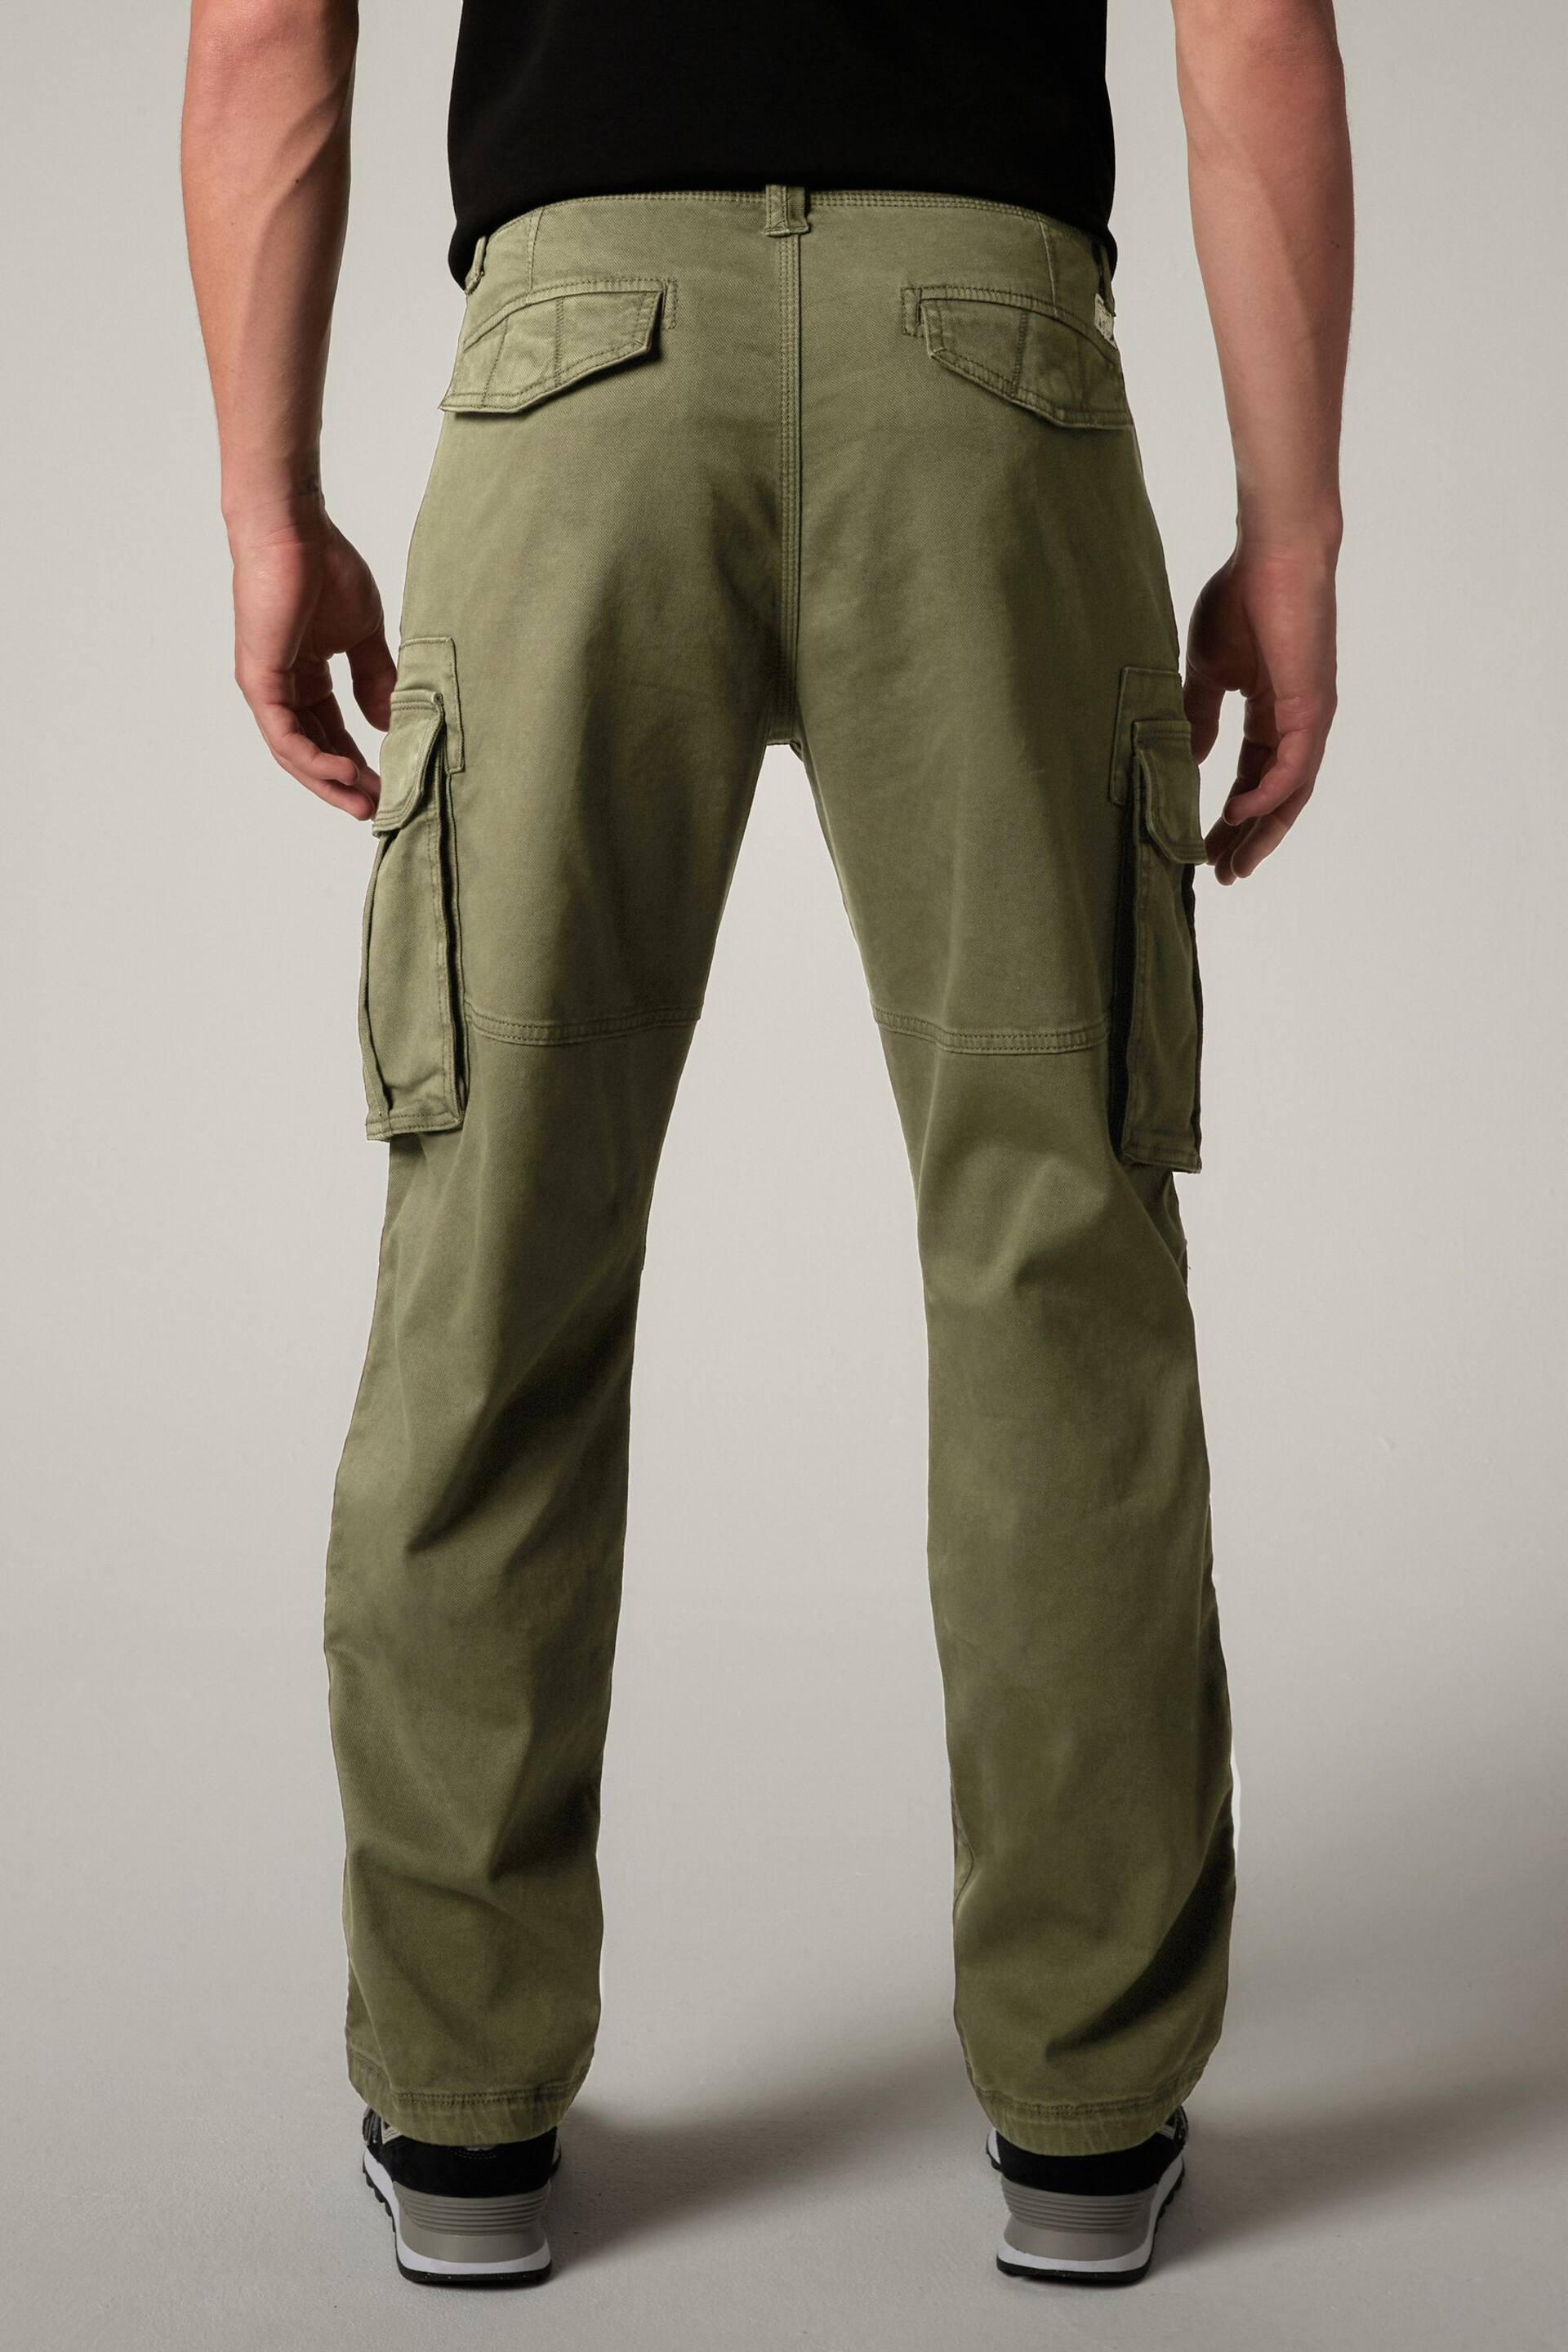 Khaki Green Straight Authentic Stretch Cotton Blend Cargo Trousers - Image 4 of 10